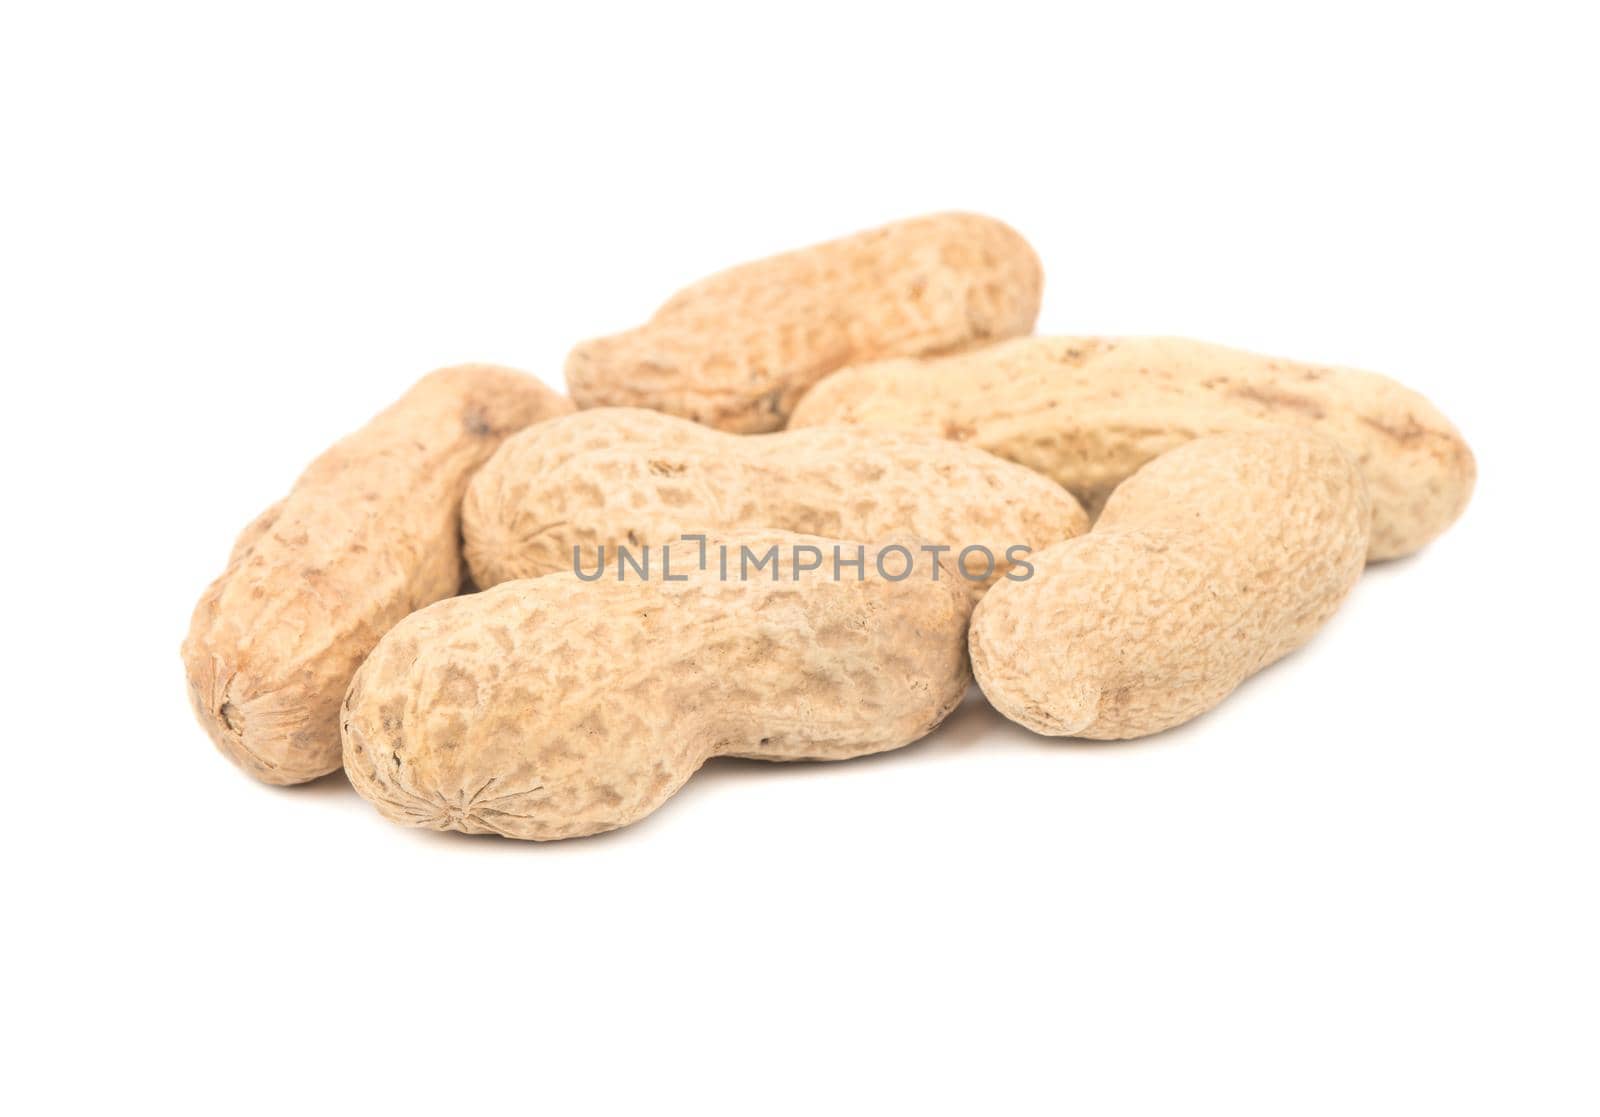 Several peanuts in shell on a white background